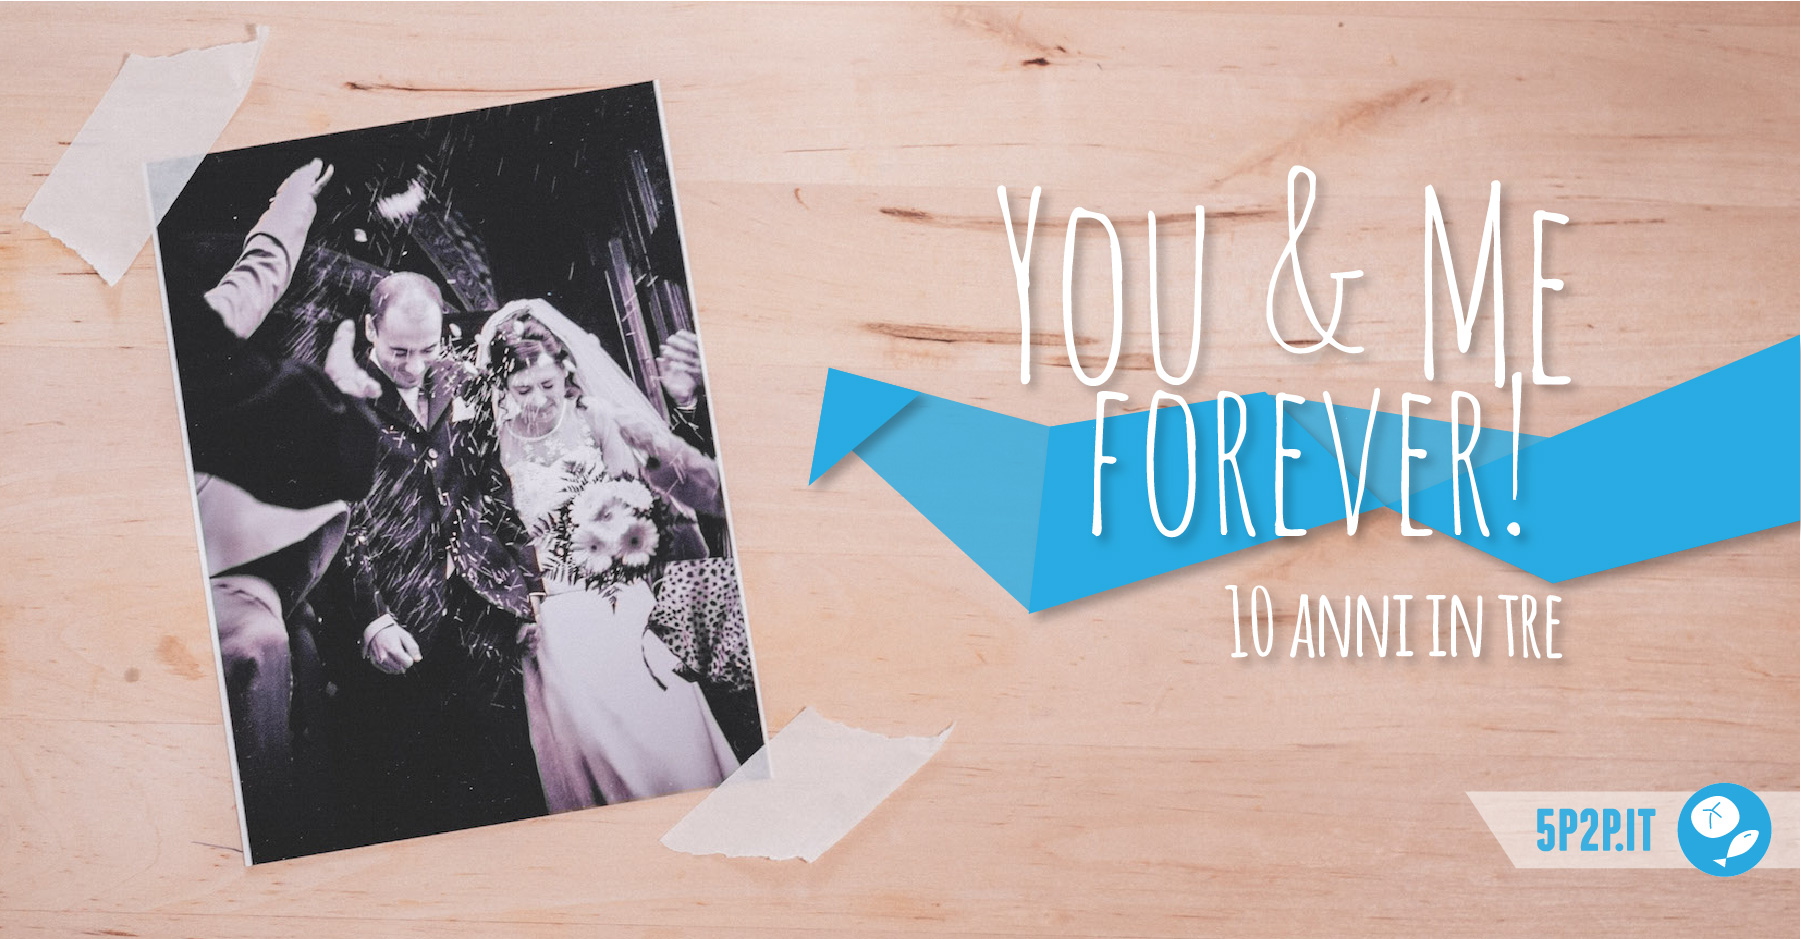 You and me forever! 10 anni in tre